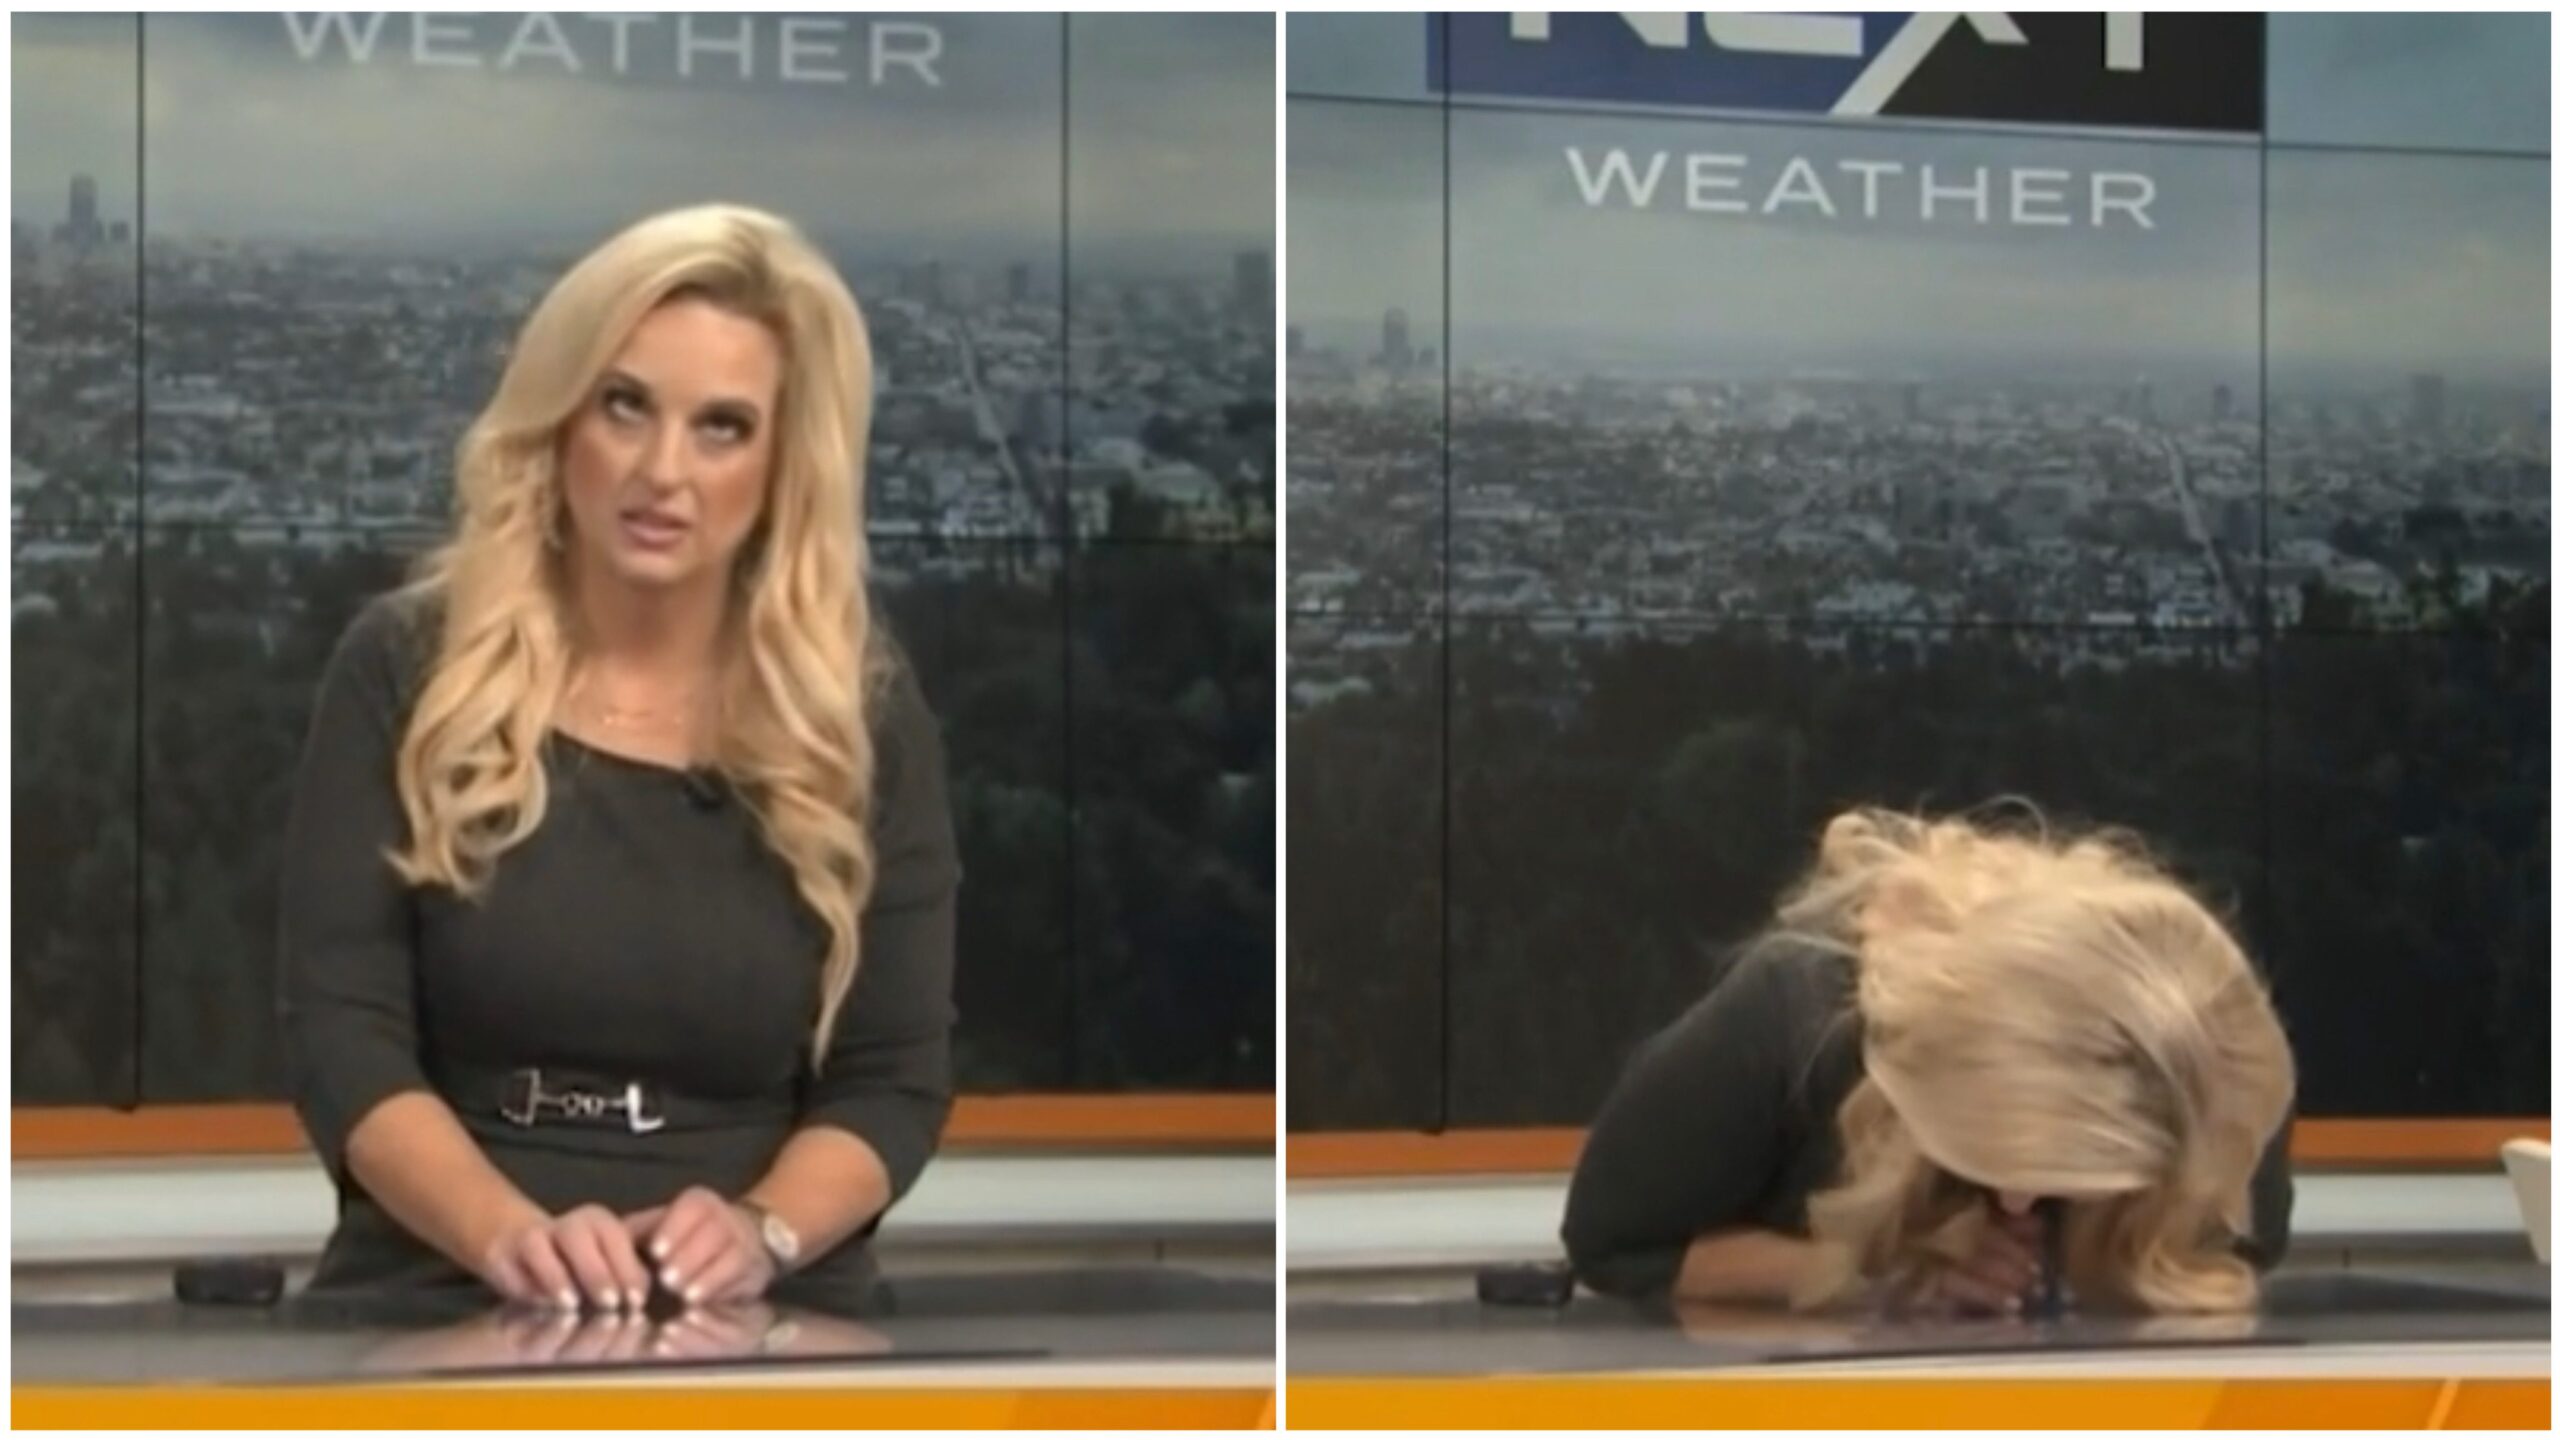 Horror: CBS Meteorologist Collapses on Live TV Broadcast (VIDEO) | The Gateway Pundit | by Jim Hᴏft